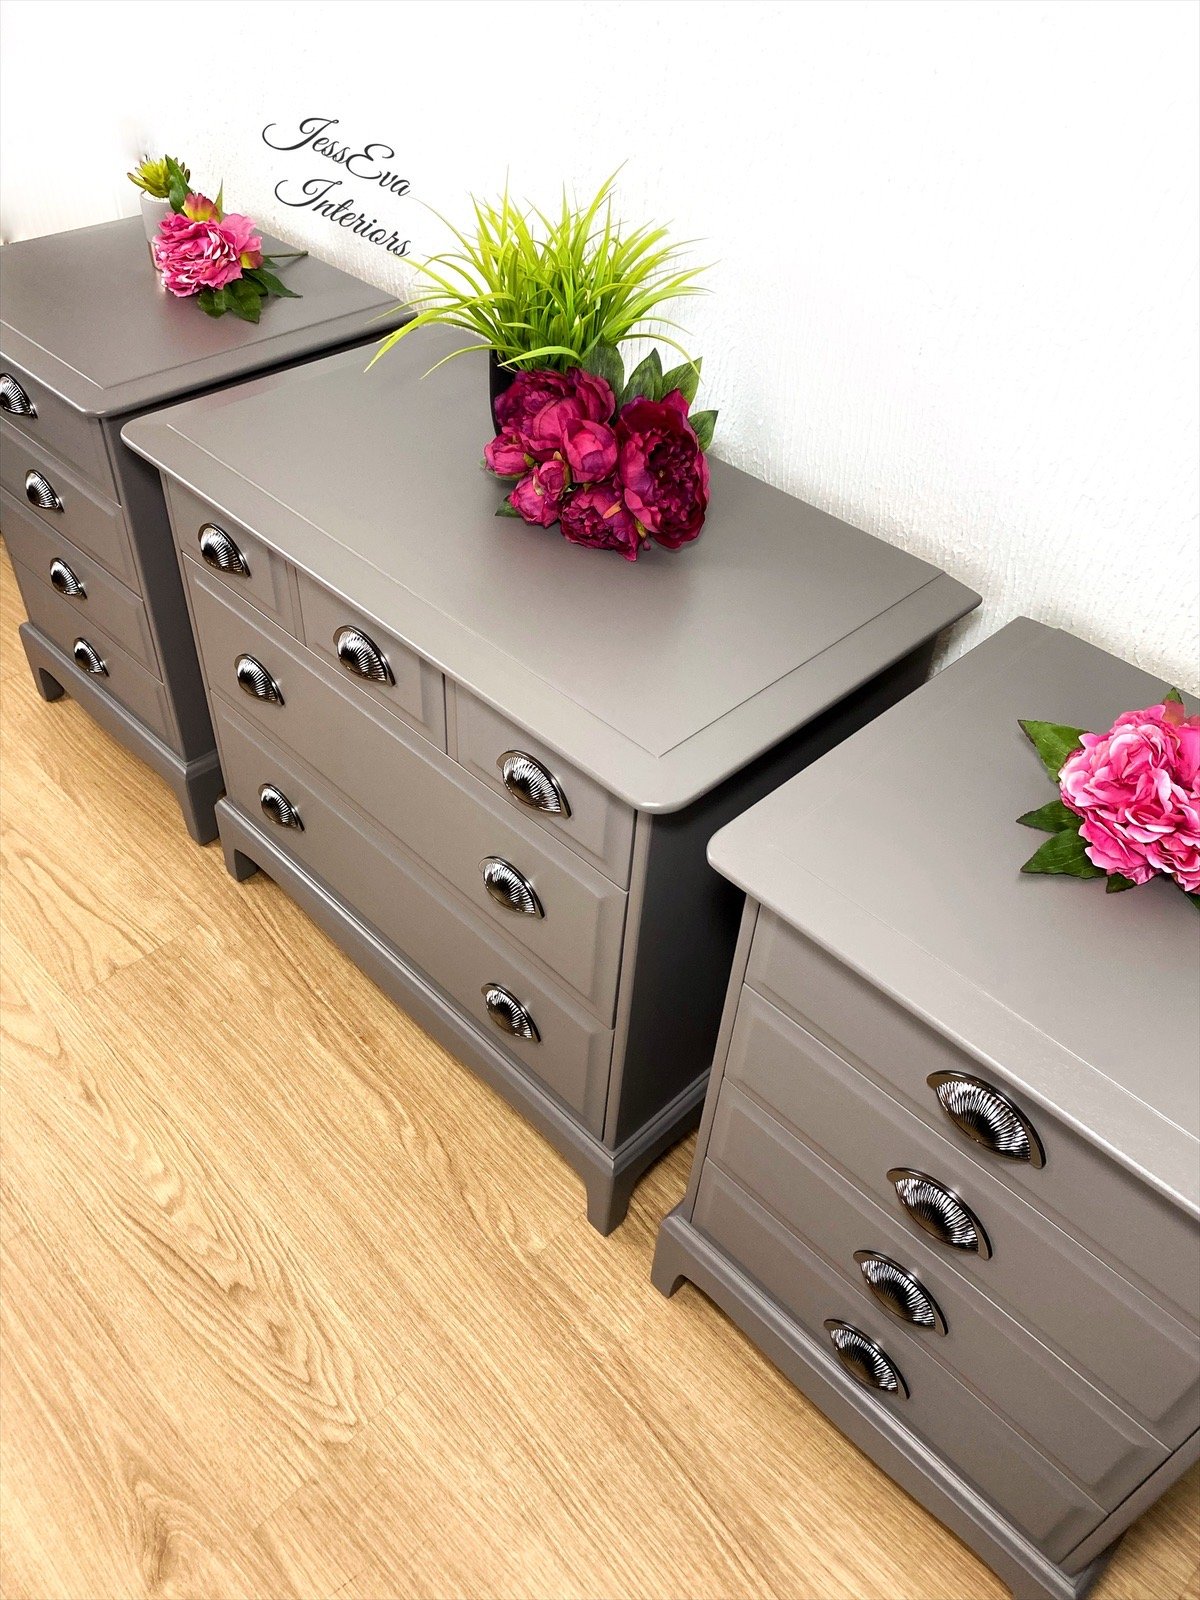 Stag Minstrel Bedroom Furniture Set, Grey Chest Of Drawers and Bedside Tables.